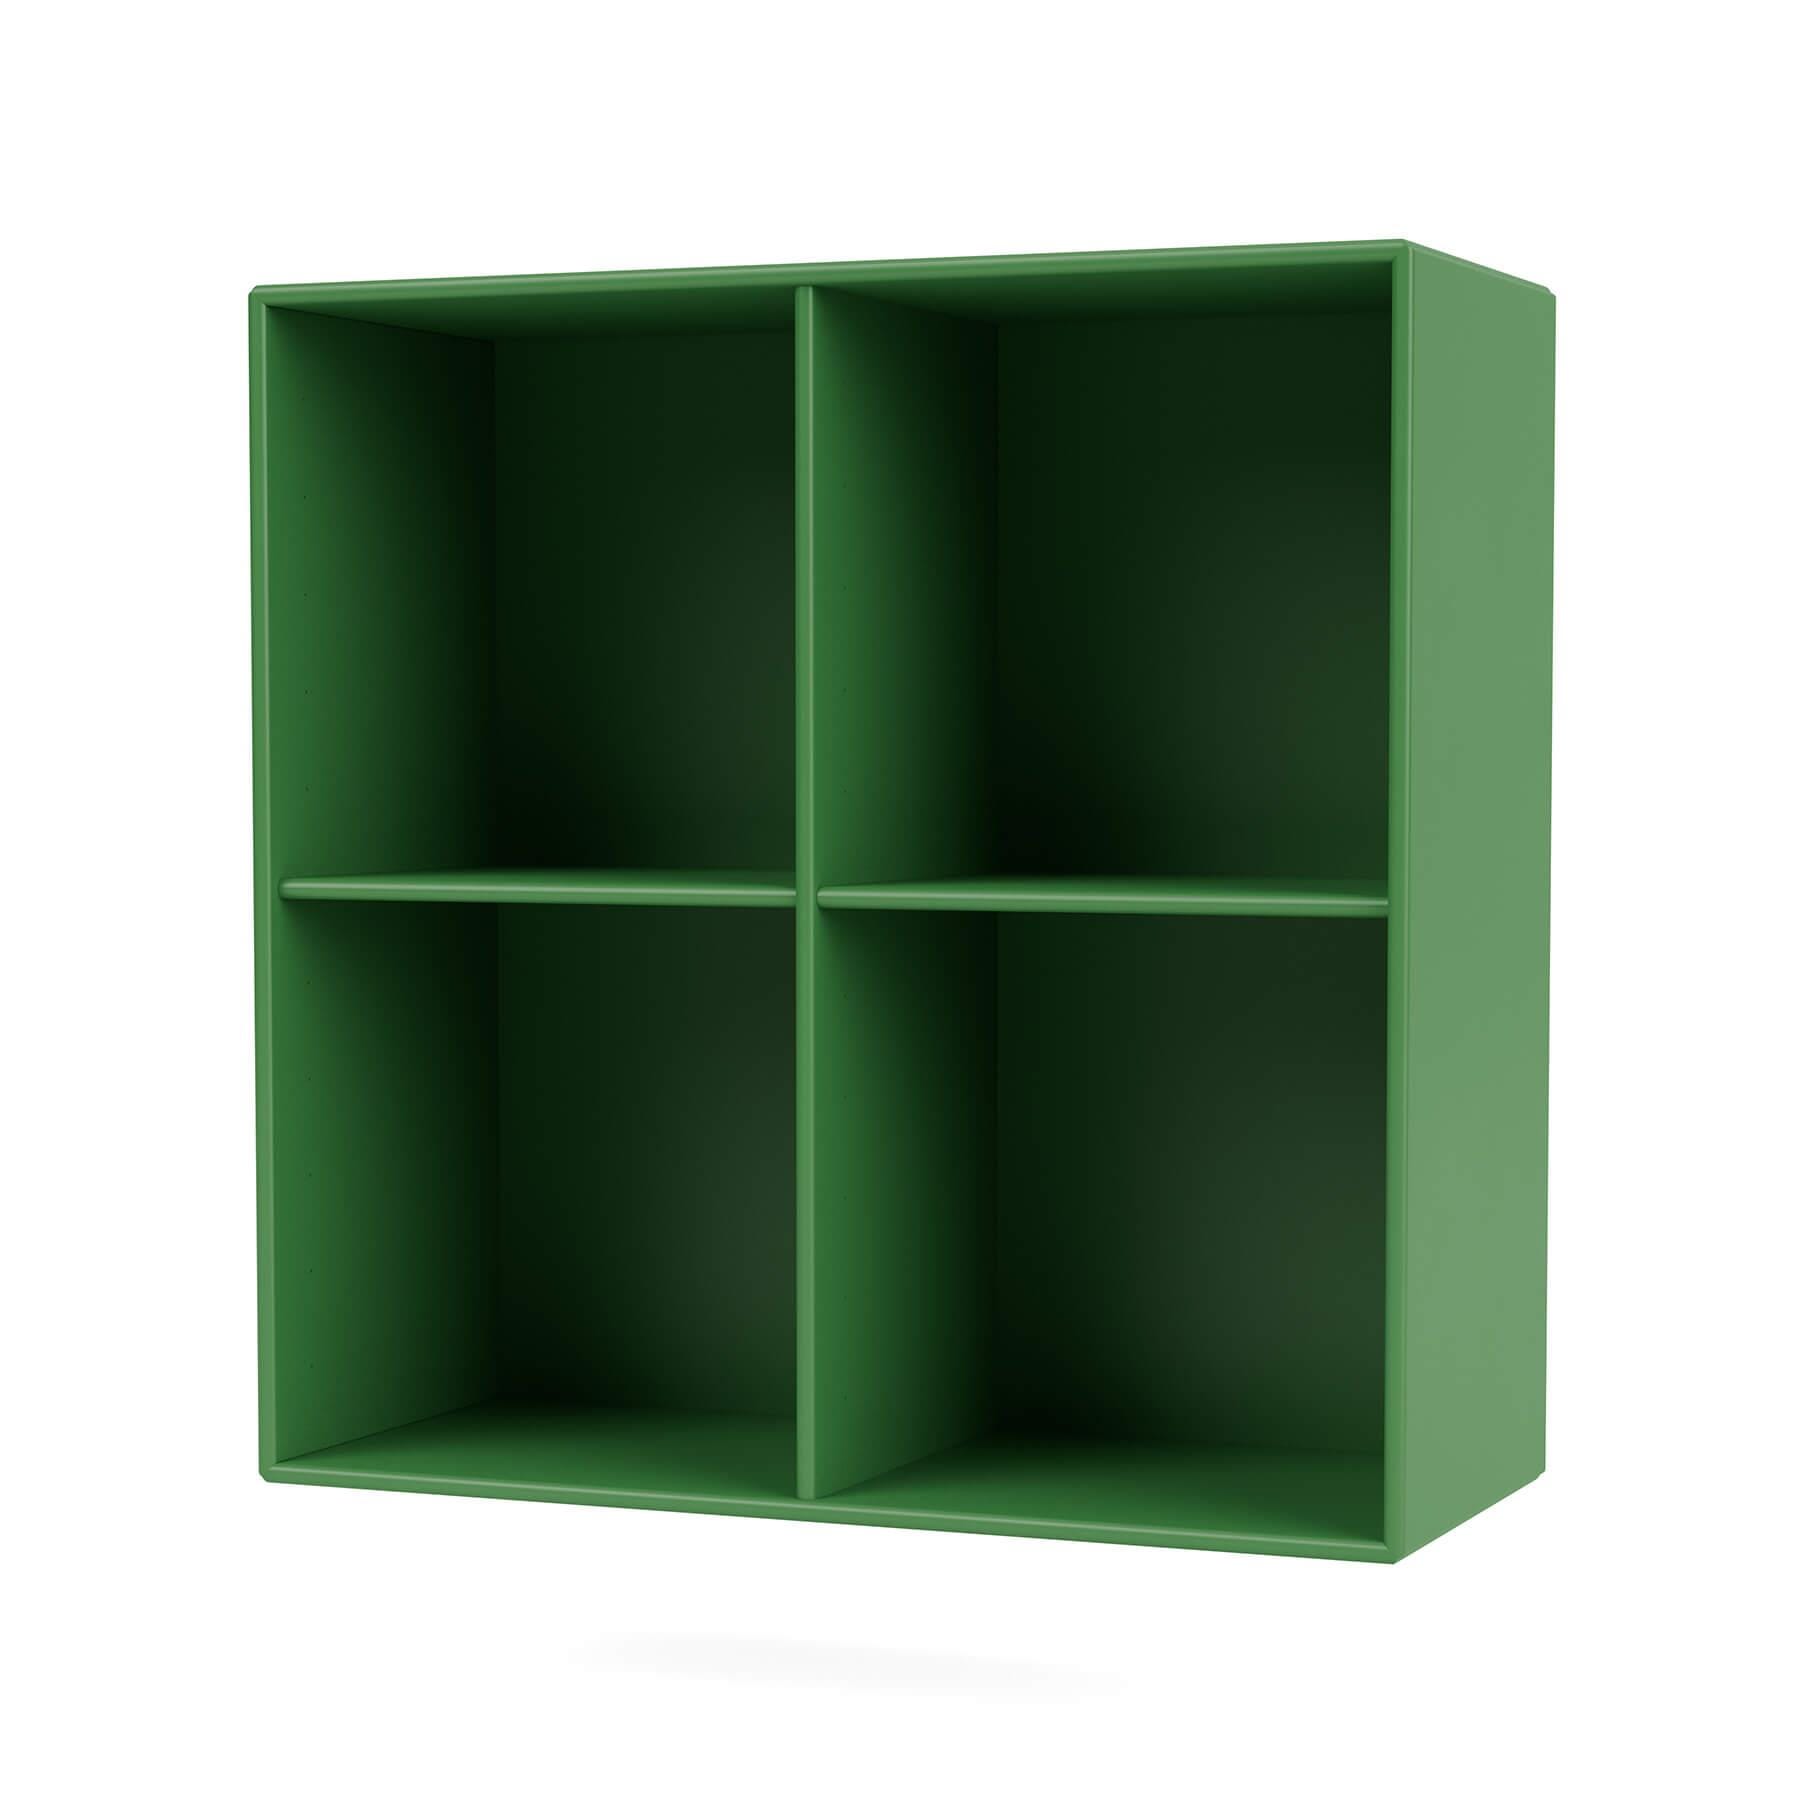 Montana Show Bookcase Parsley Wall Mounted Green Designer Furniture From Holloways Of Ludlow